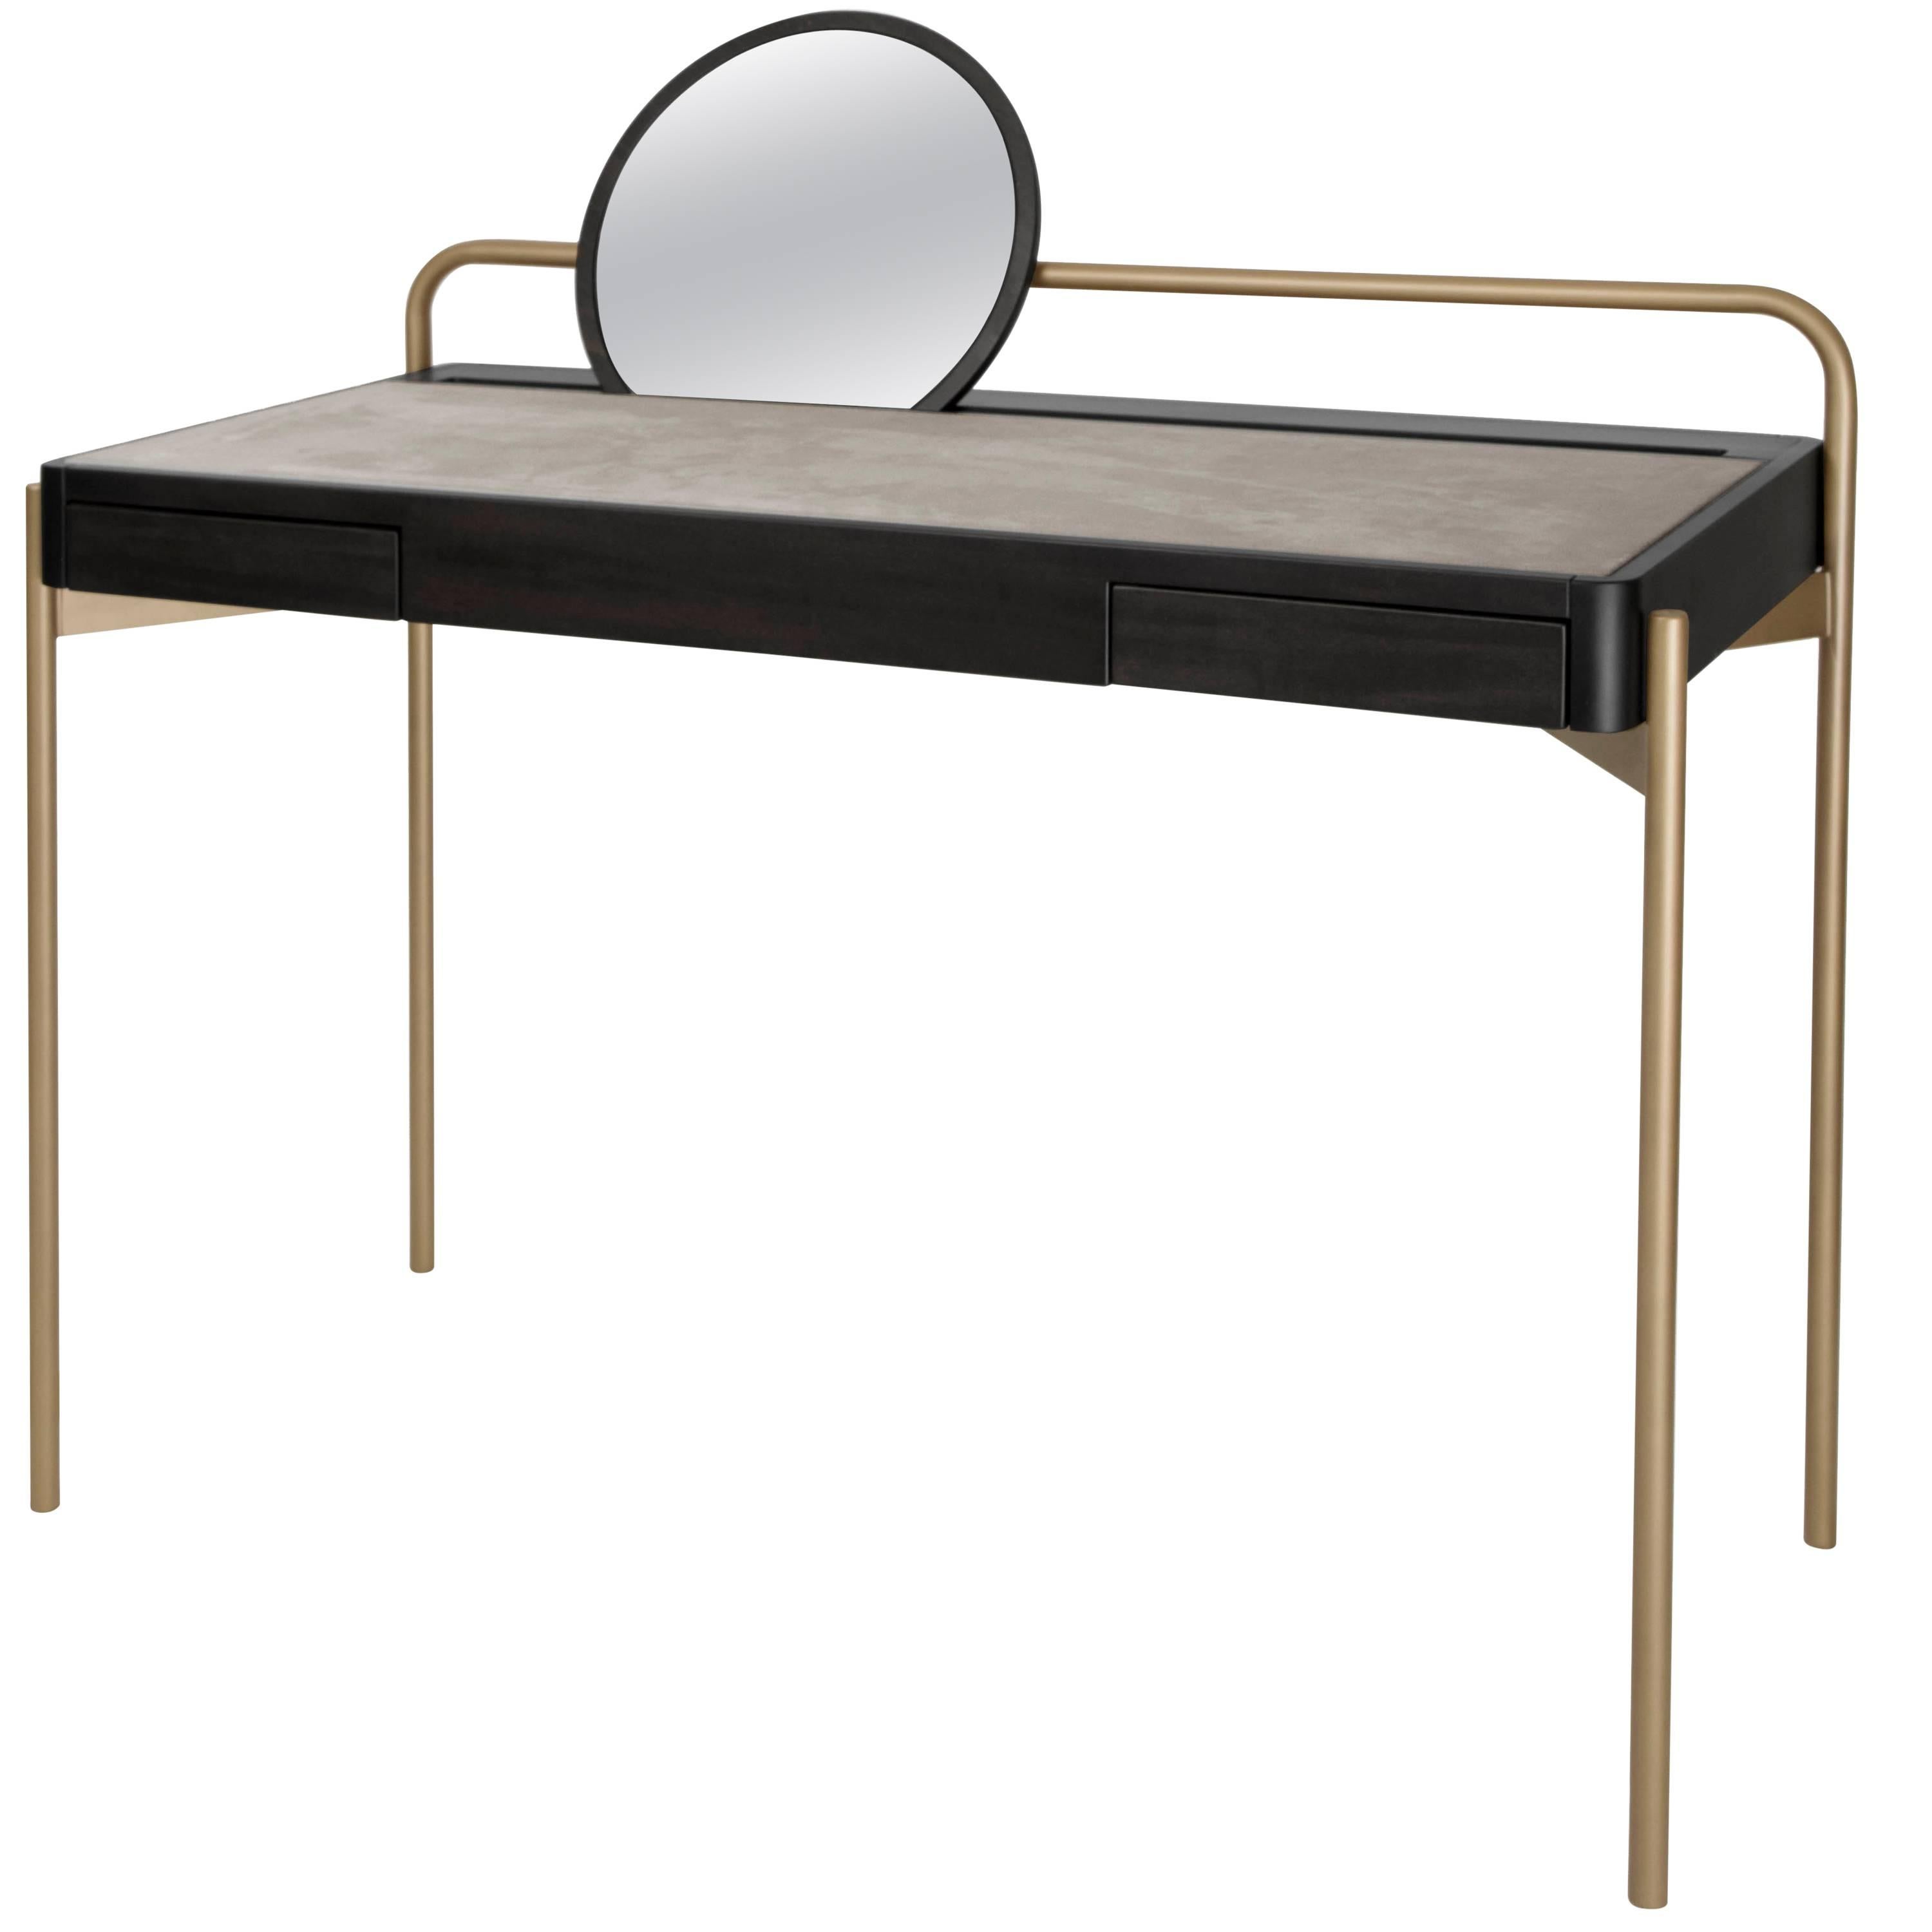 Roll Desk 02 Writing Table in Dark Walnut, Brass, Suede and Mirror For Sale